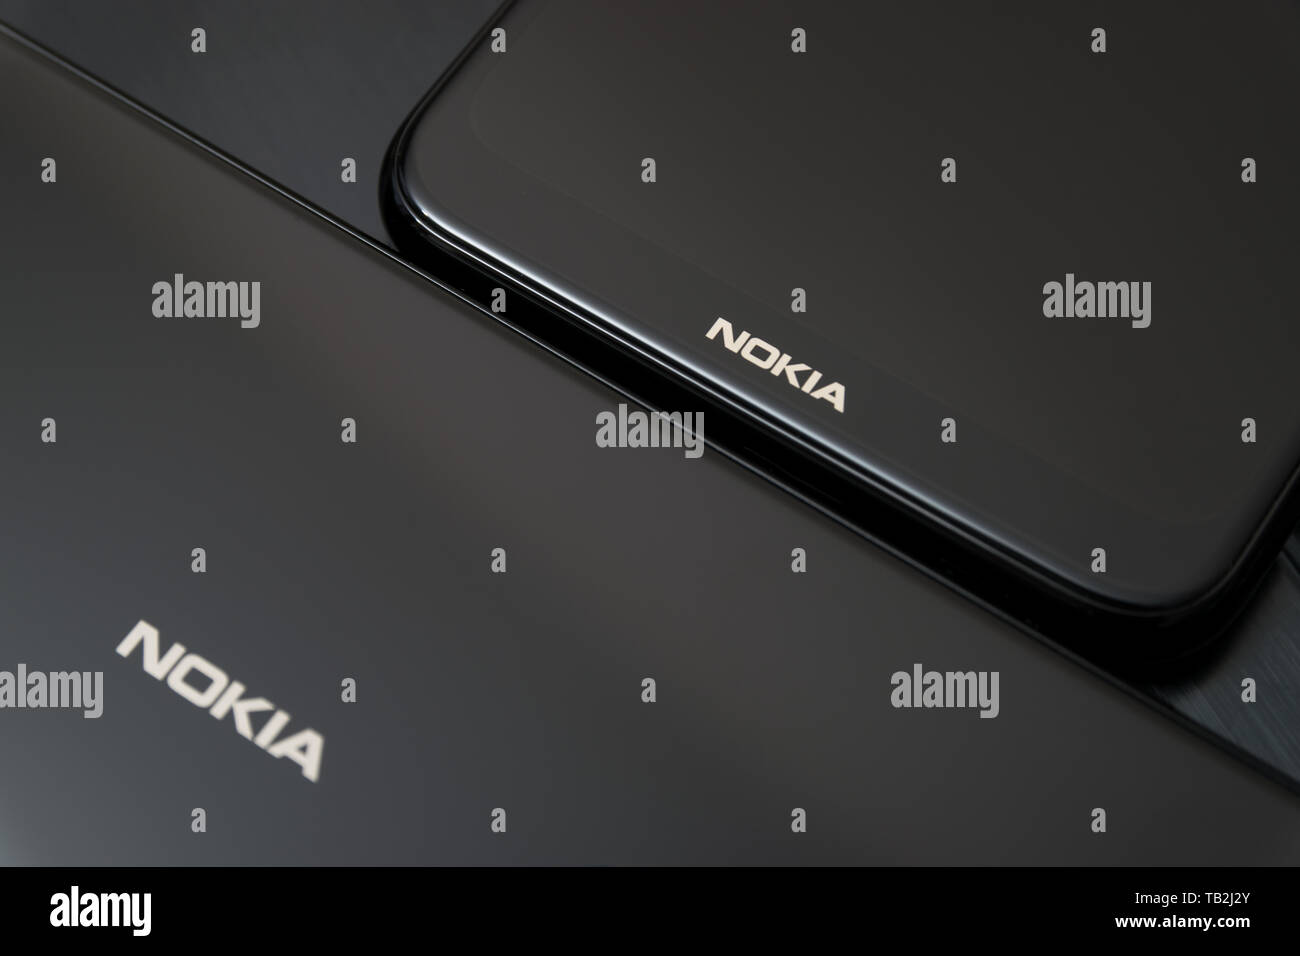 Cluj, Romania - May 13, 2019: Nokia smartphone made by Nokia Corporation, a Finnish multinational telecommunications, information technology, and cons Stock Photo